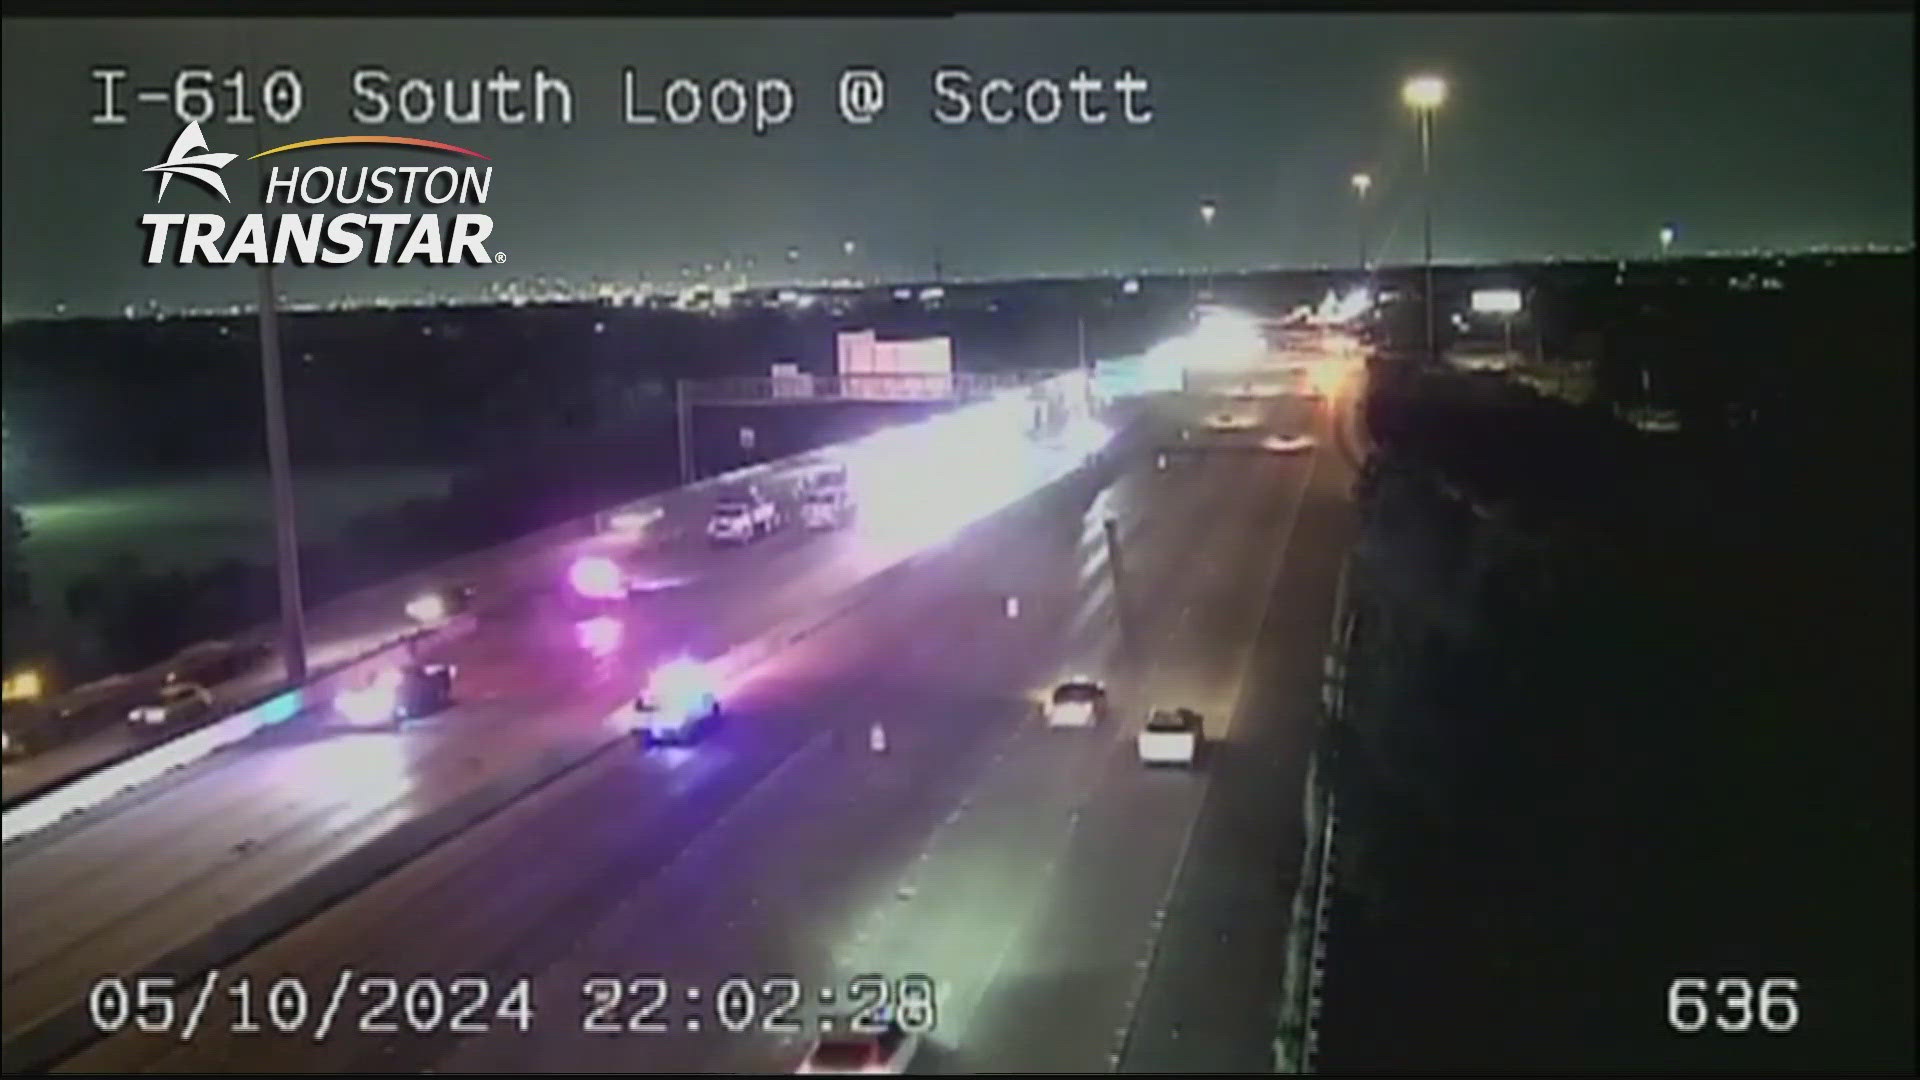 The westbound lanes of the 610/South Loop between Scott and Highway 288 was closed the weekend of May 10 for construction.